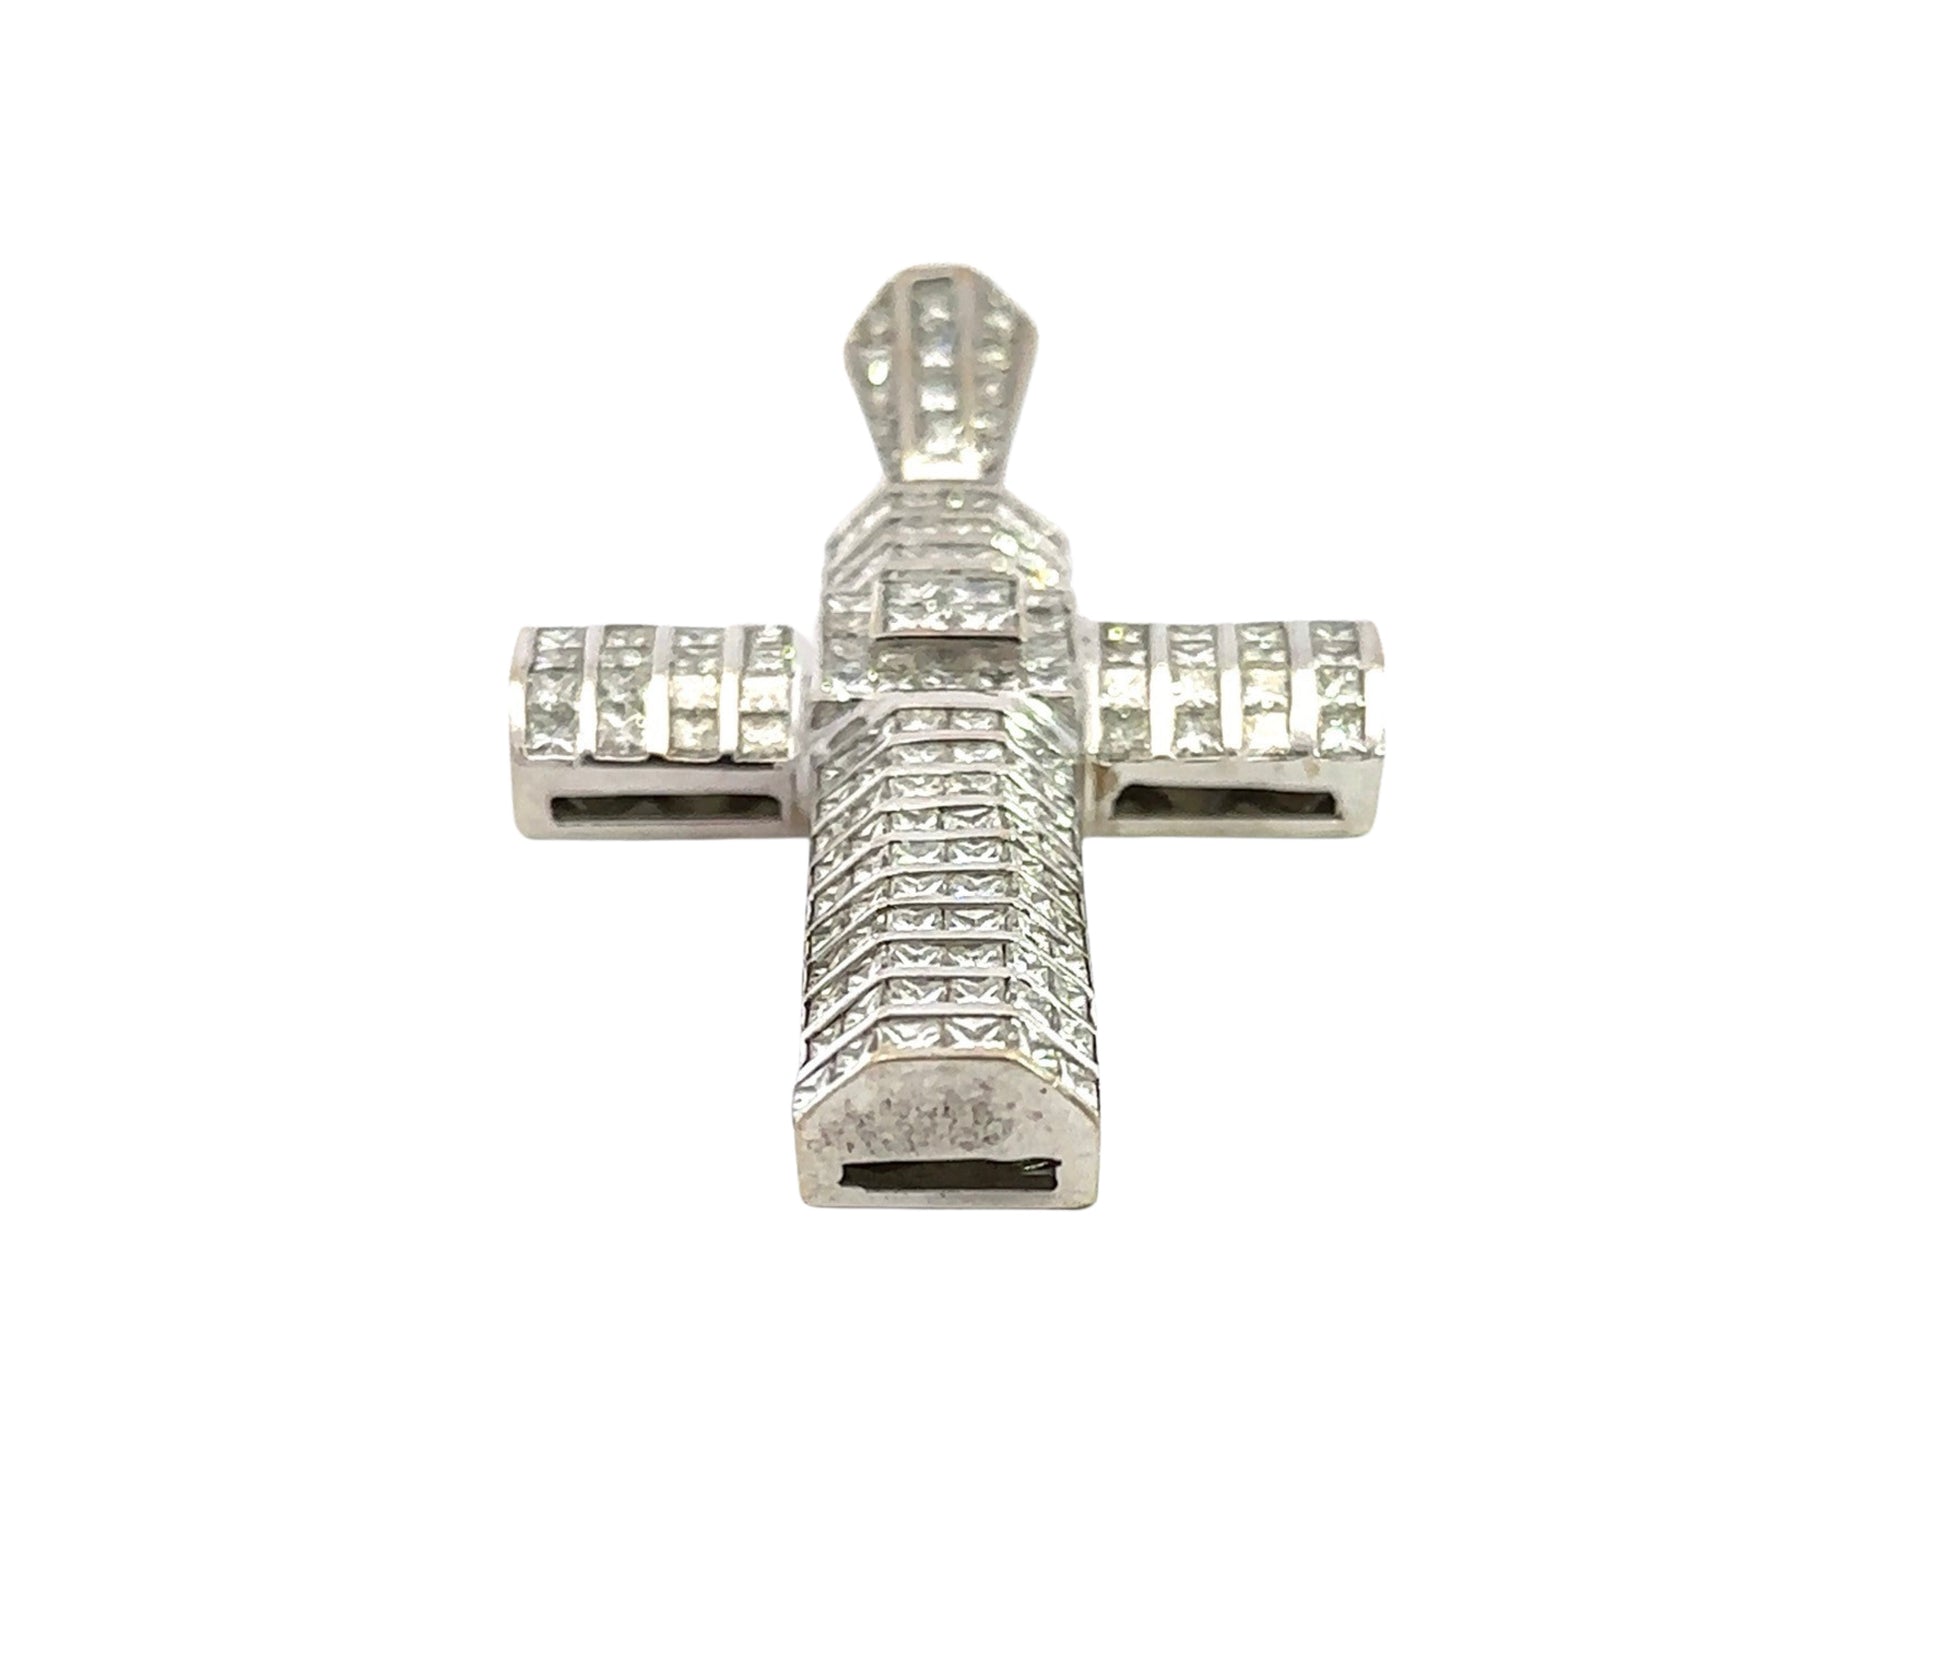 Bottom of white gold cross pendant with marks on the gold